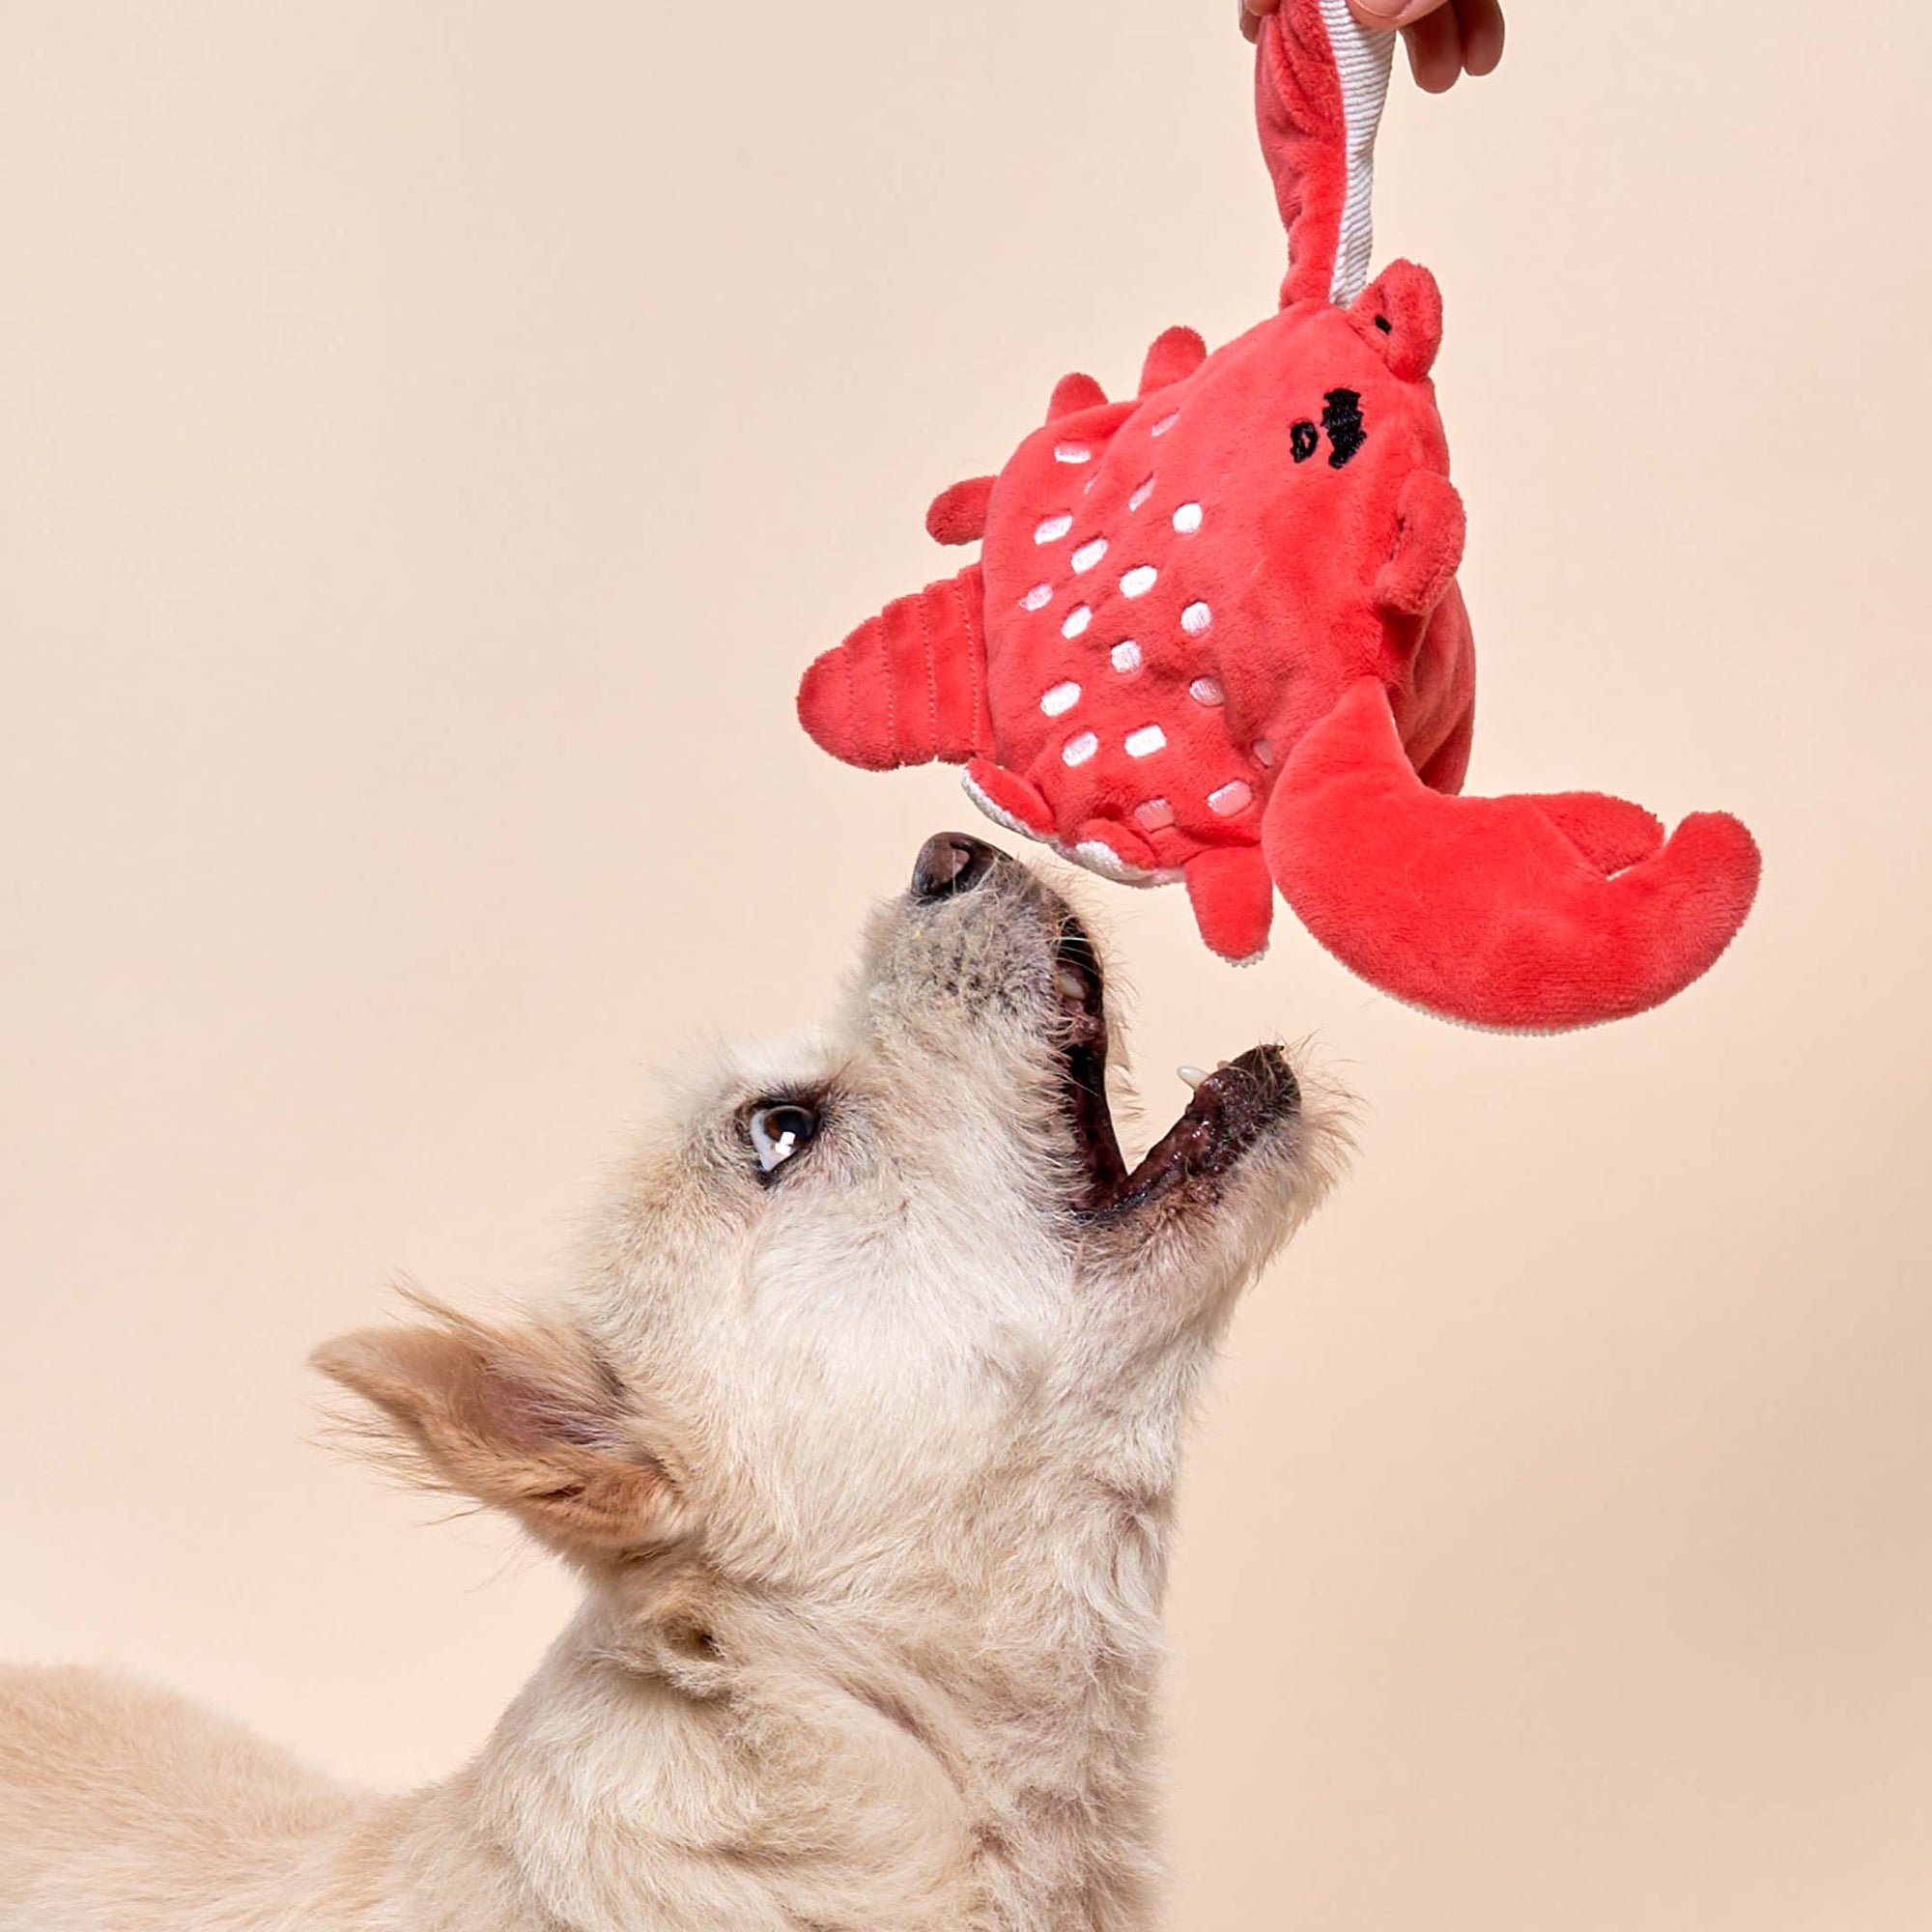 In the photo, a small light-colored dog is looking up with anticipation at a red plush crab toy being dangled above by a person. This moment captures the pet's interest in play, suggesting an interactive and enjoyable experience.